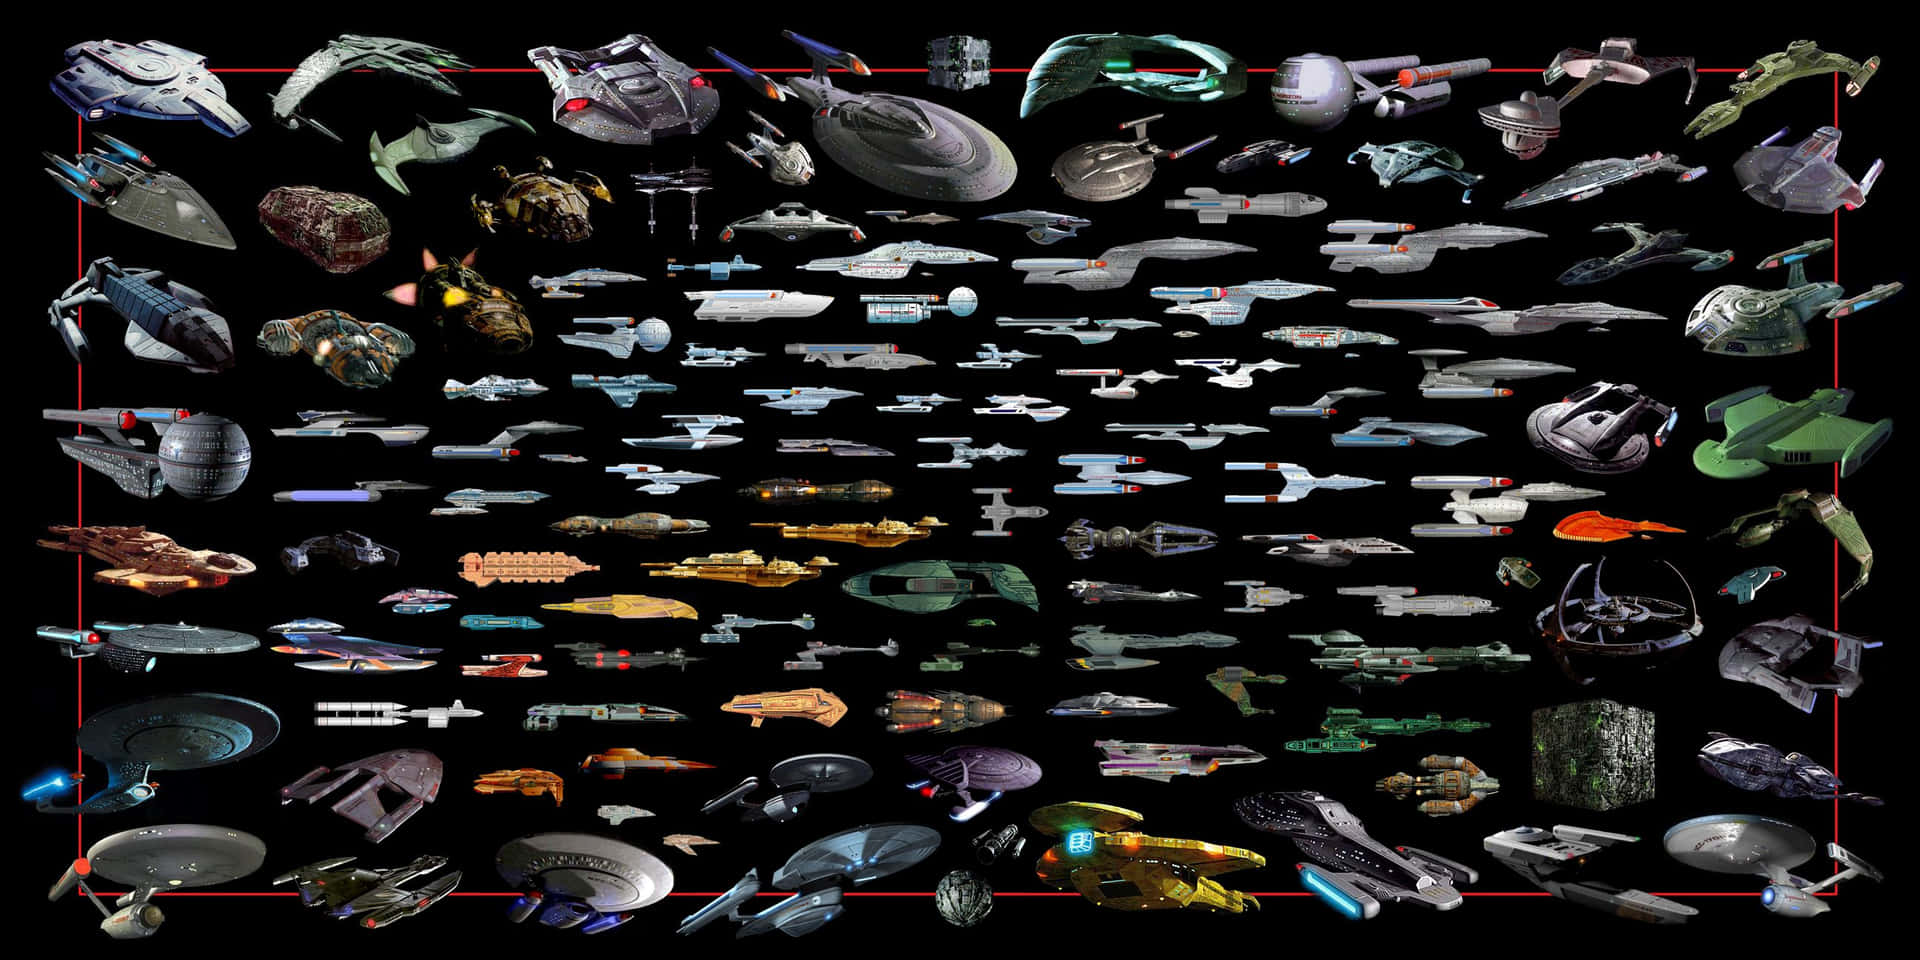 "Explore the Uncharted Regions of the Final Frontier with the Star Trek Zoom Background"